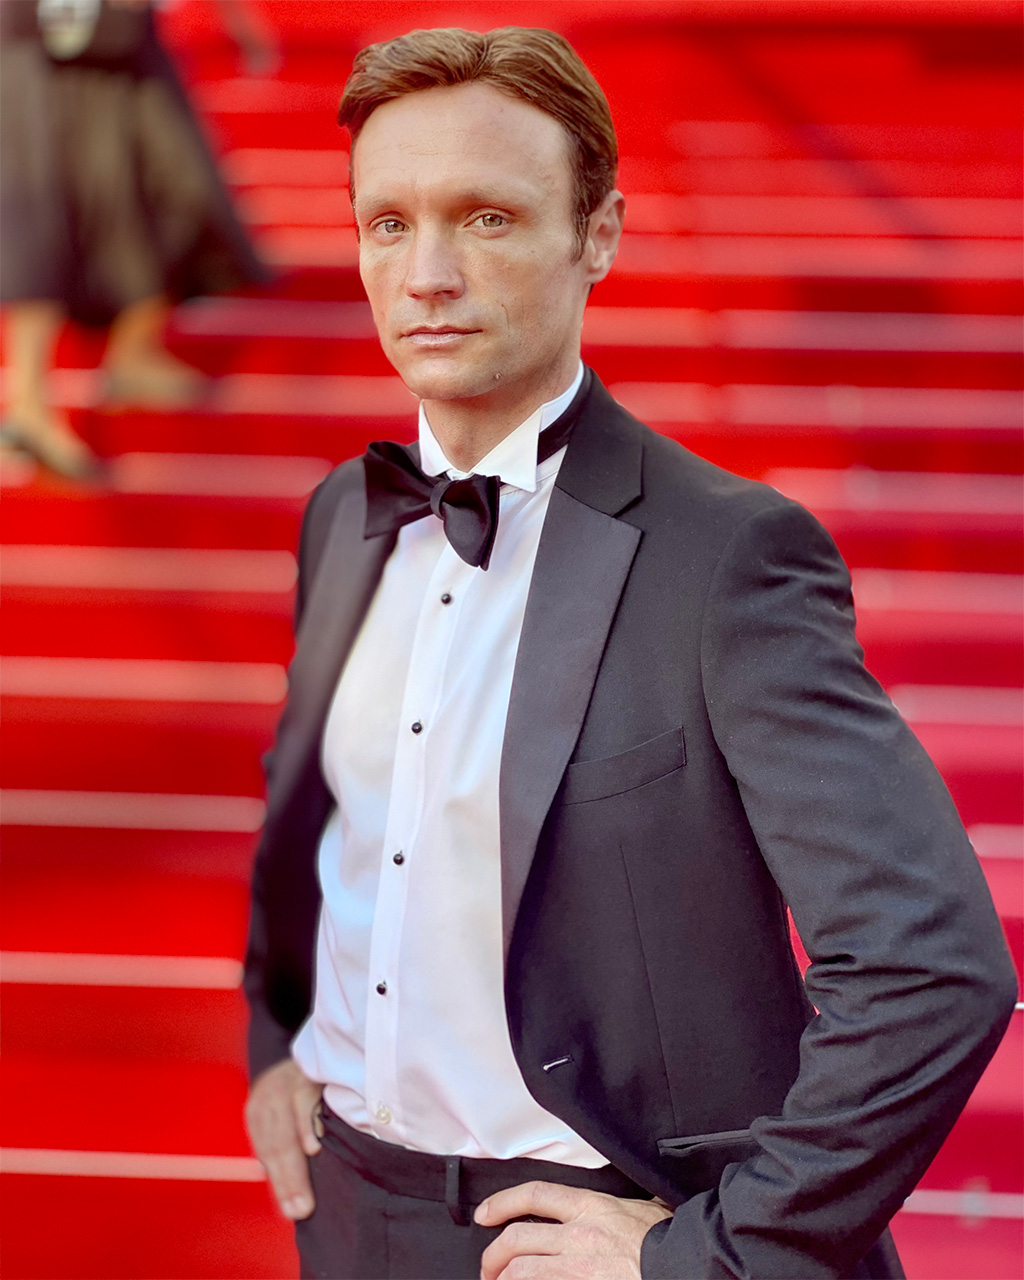 Hans Obma, wearing a tuxedo, poses on the red carpet.